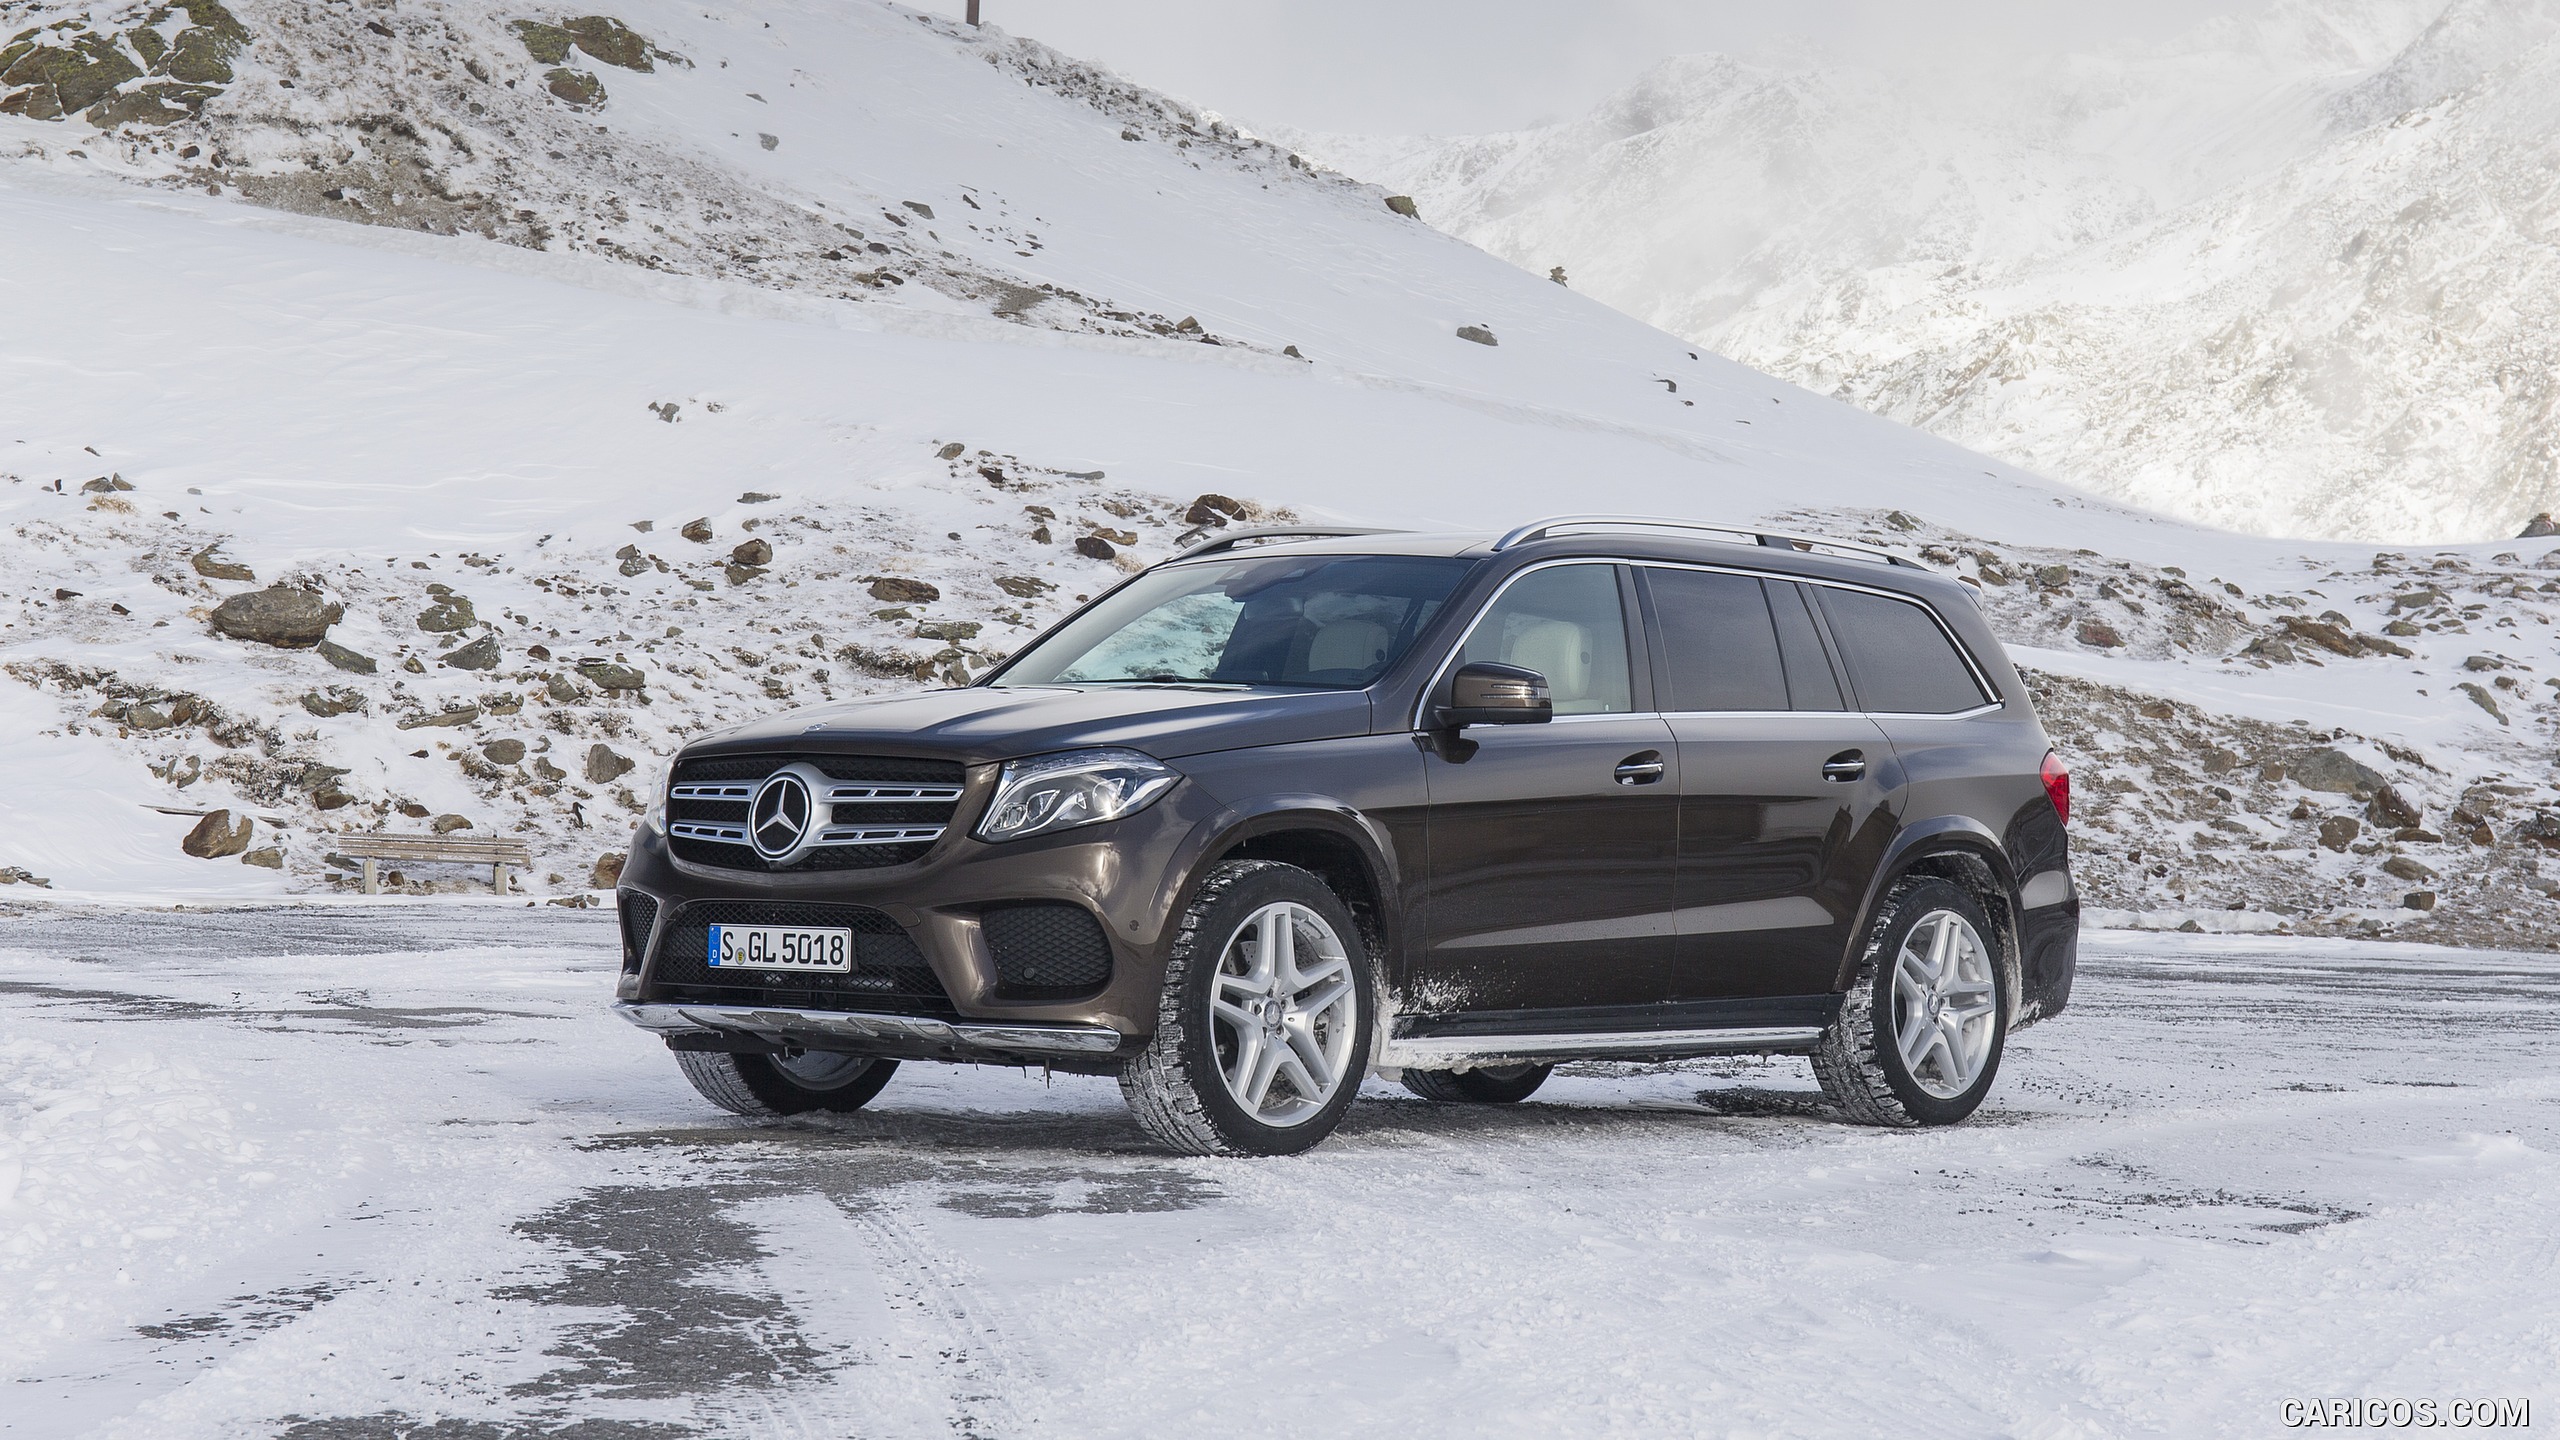 2017 Mercedes-Benz GLS 350d 4MATIC AMG Line in Snow - Front, #186 of 255